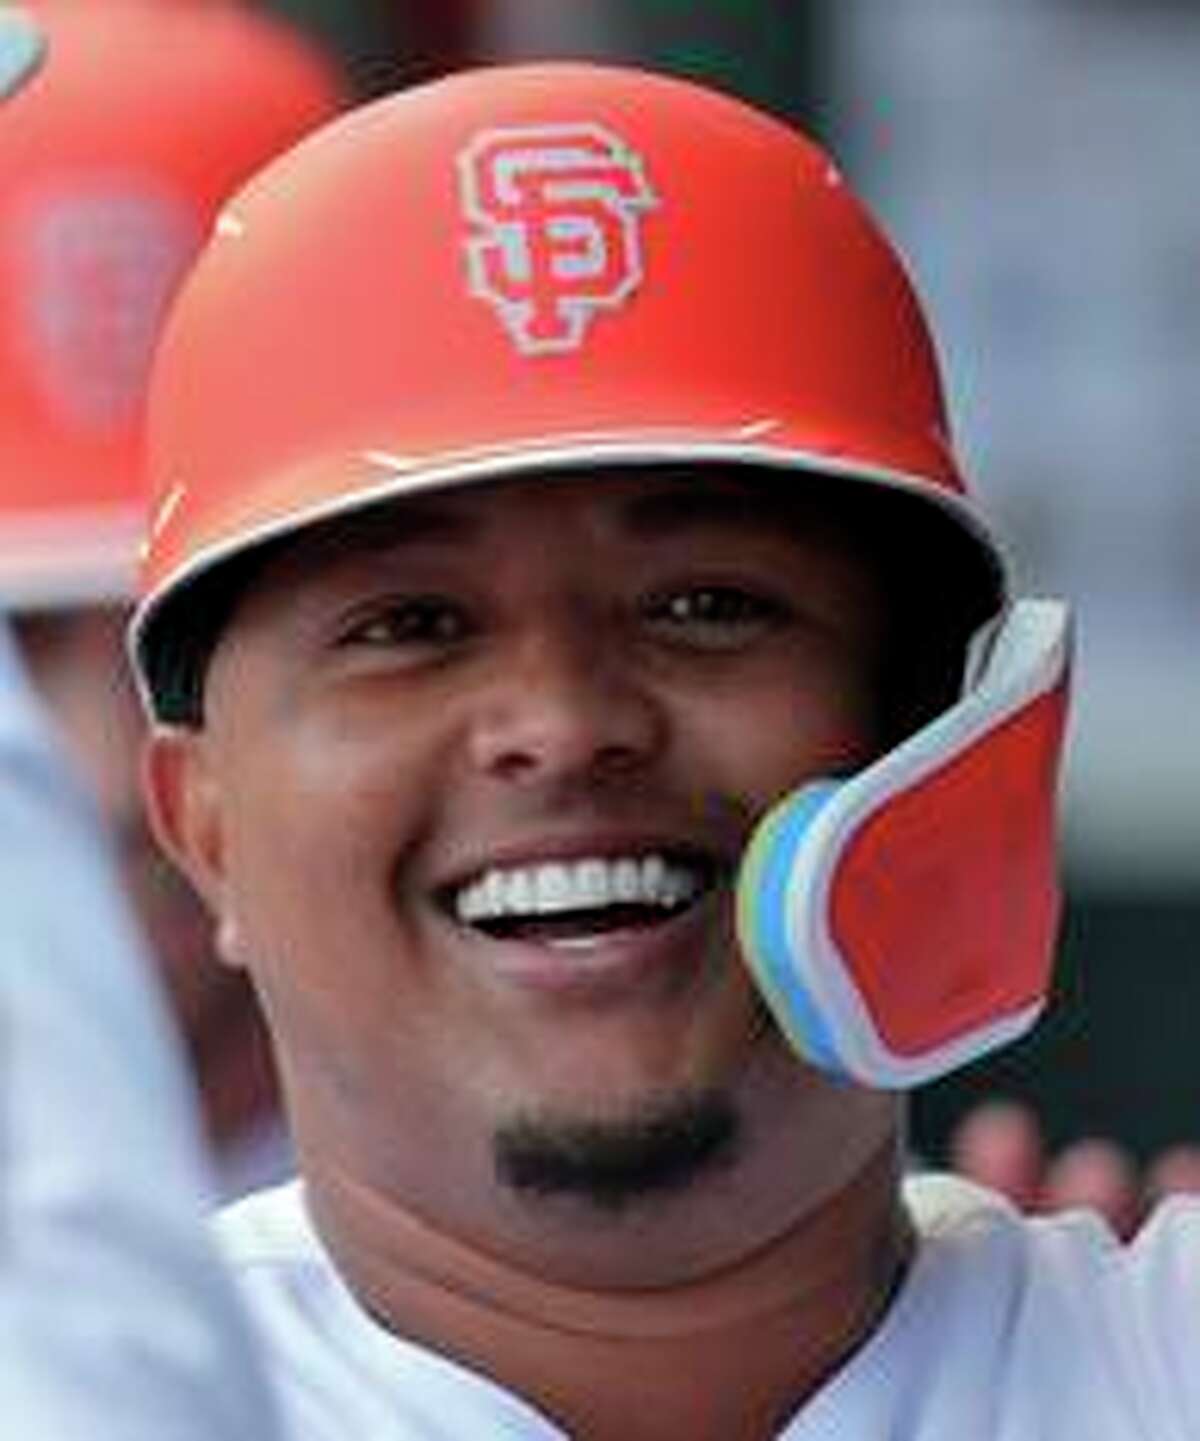 Yermin Mercedes smiles in the dugout as Giants teammates congratulate him following his two-run HR in Tuesday’s blowout win at Oracle Park.